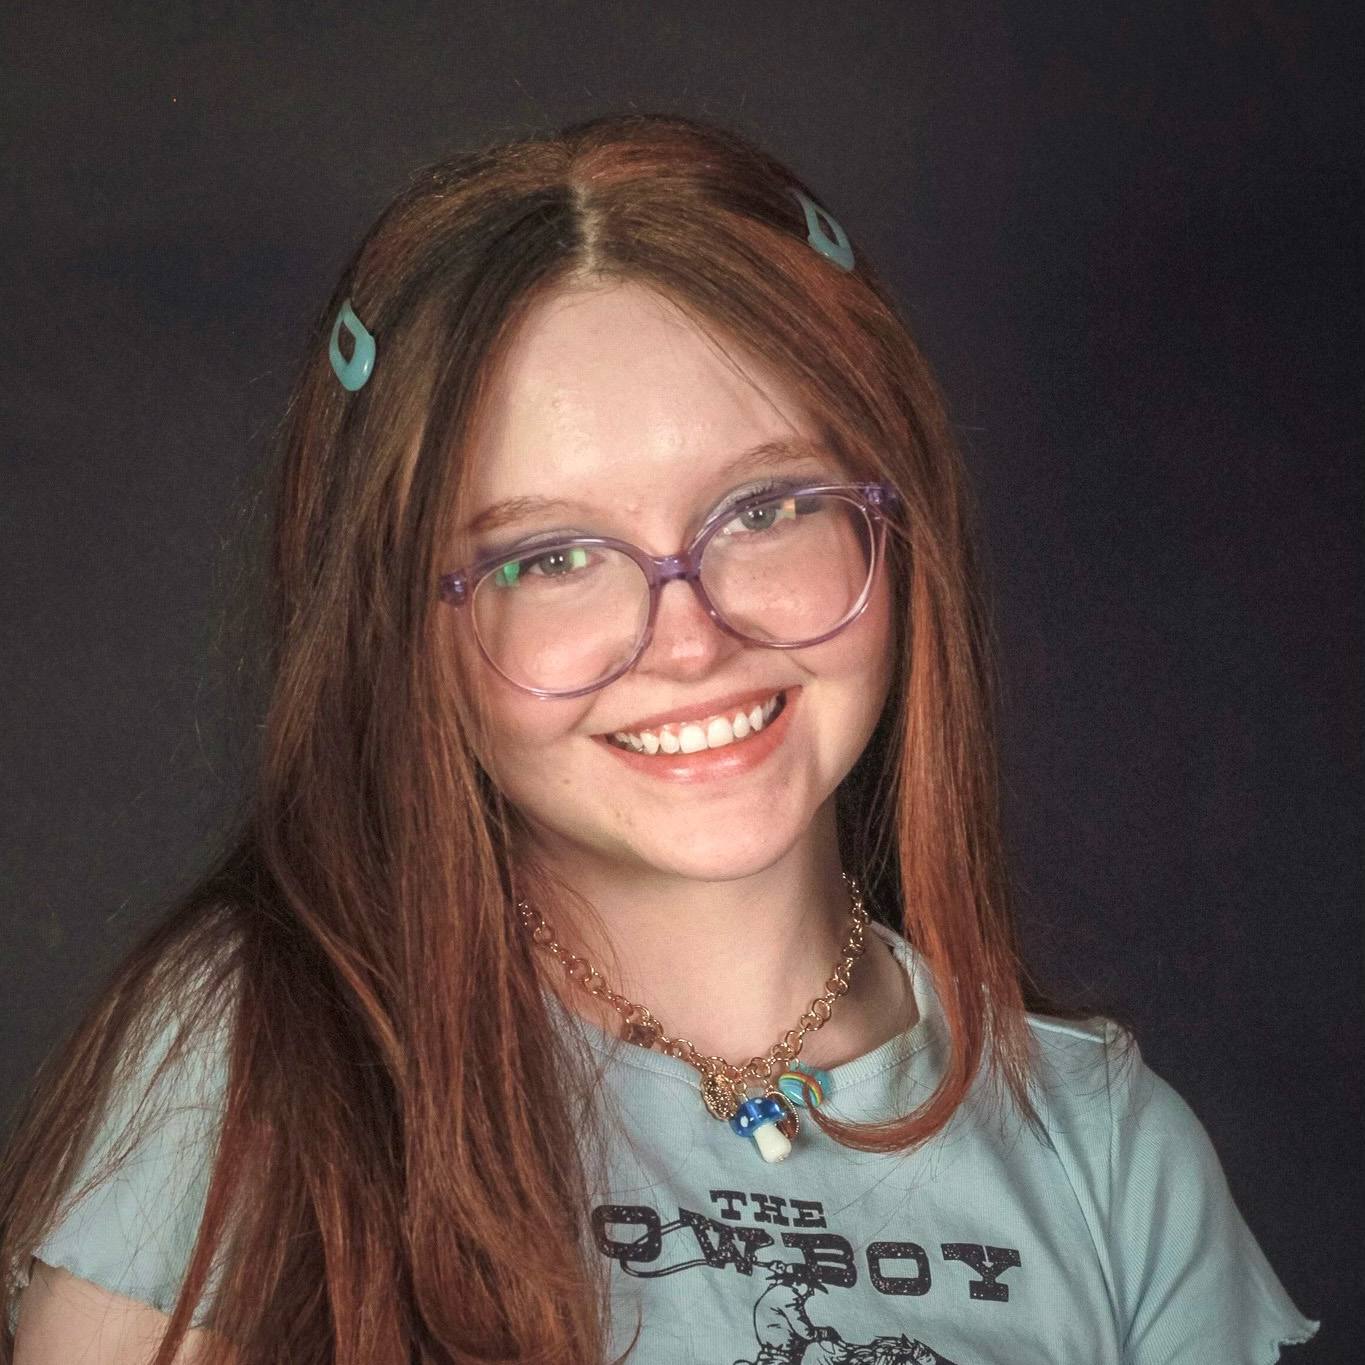 Annika Godwin posing for a headshot with two green clips in her red hair wearing purple rimmed glasses and a light green shirt.